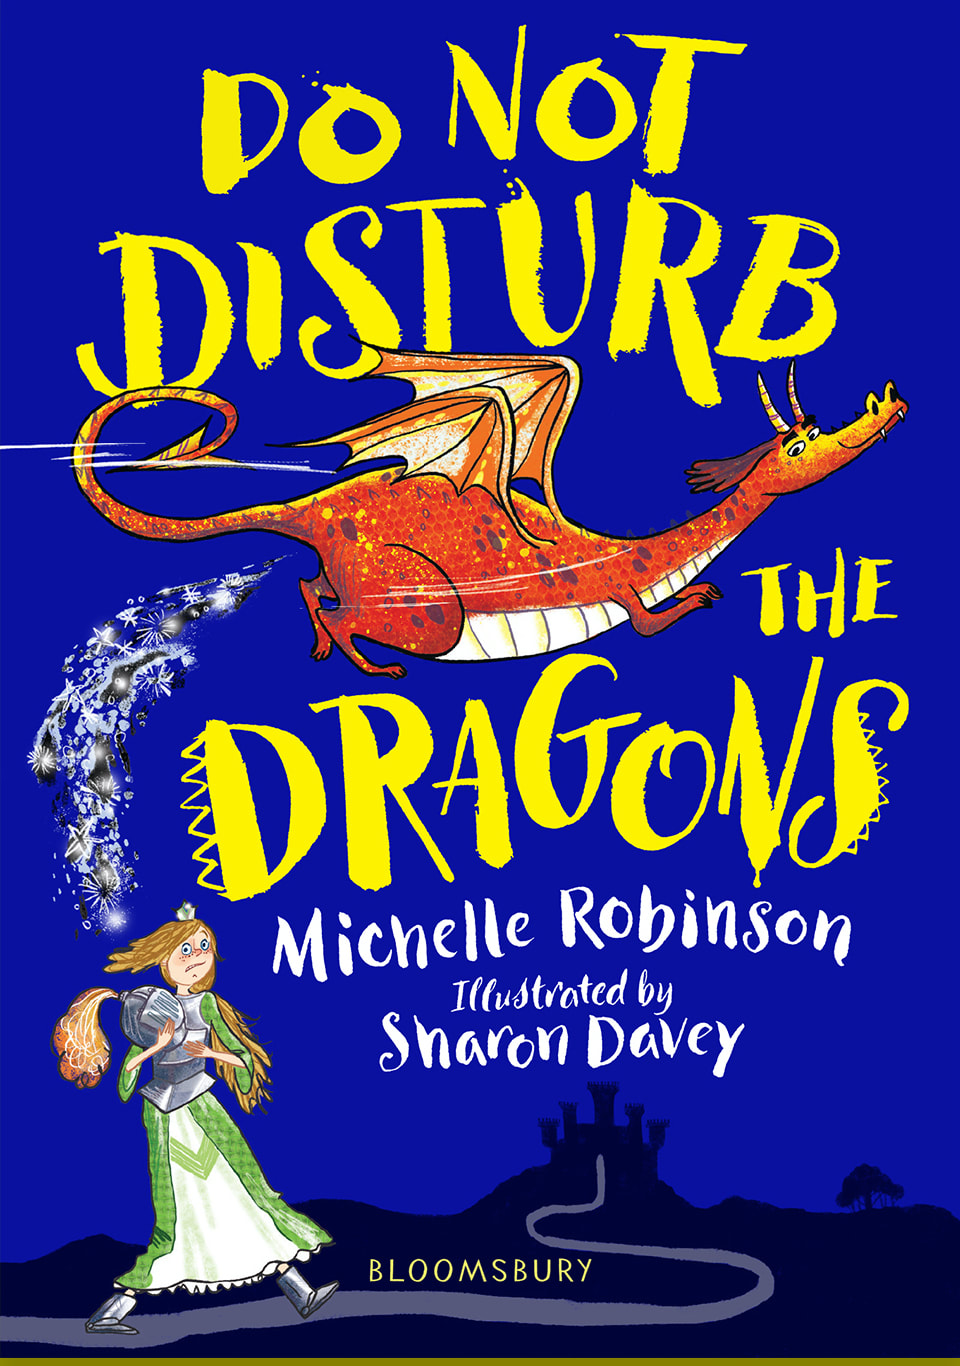 Front cover of DO NOT DISTURB THE DRAGONS. A red dragon is flying above a princess dressed in armour. The dragon is doing a glittering poo, the princess looks up, daunted. A winding path leads to a castle in the background.